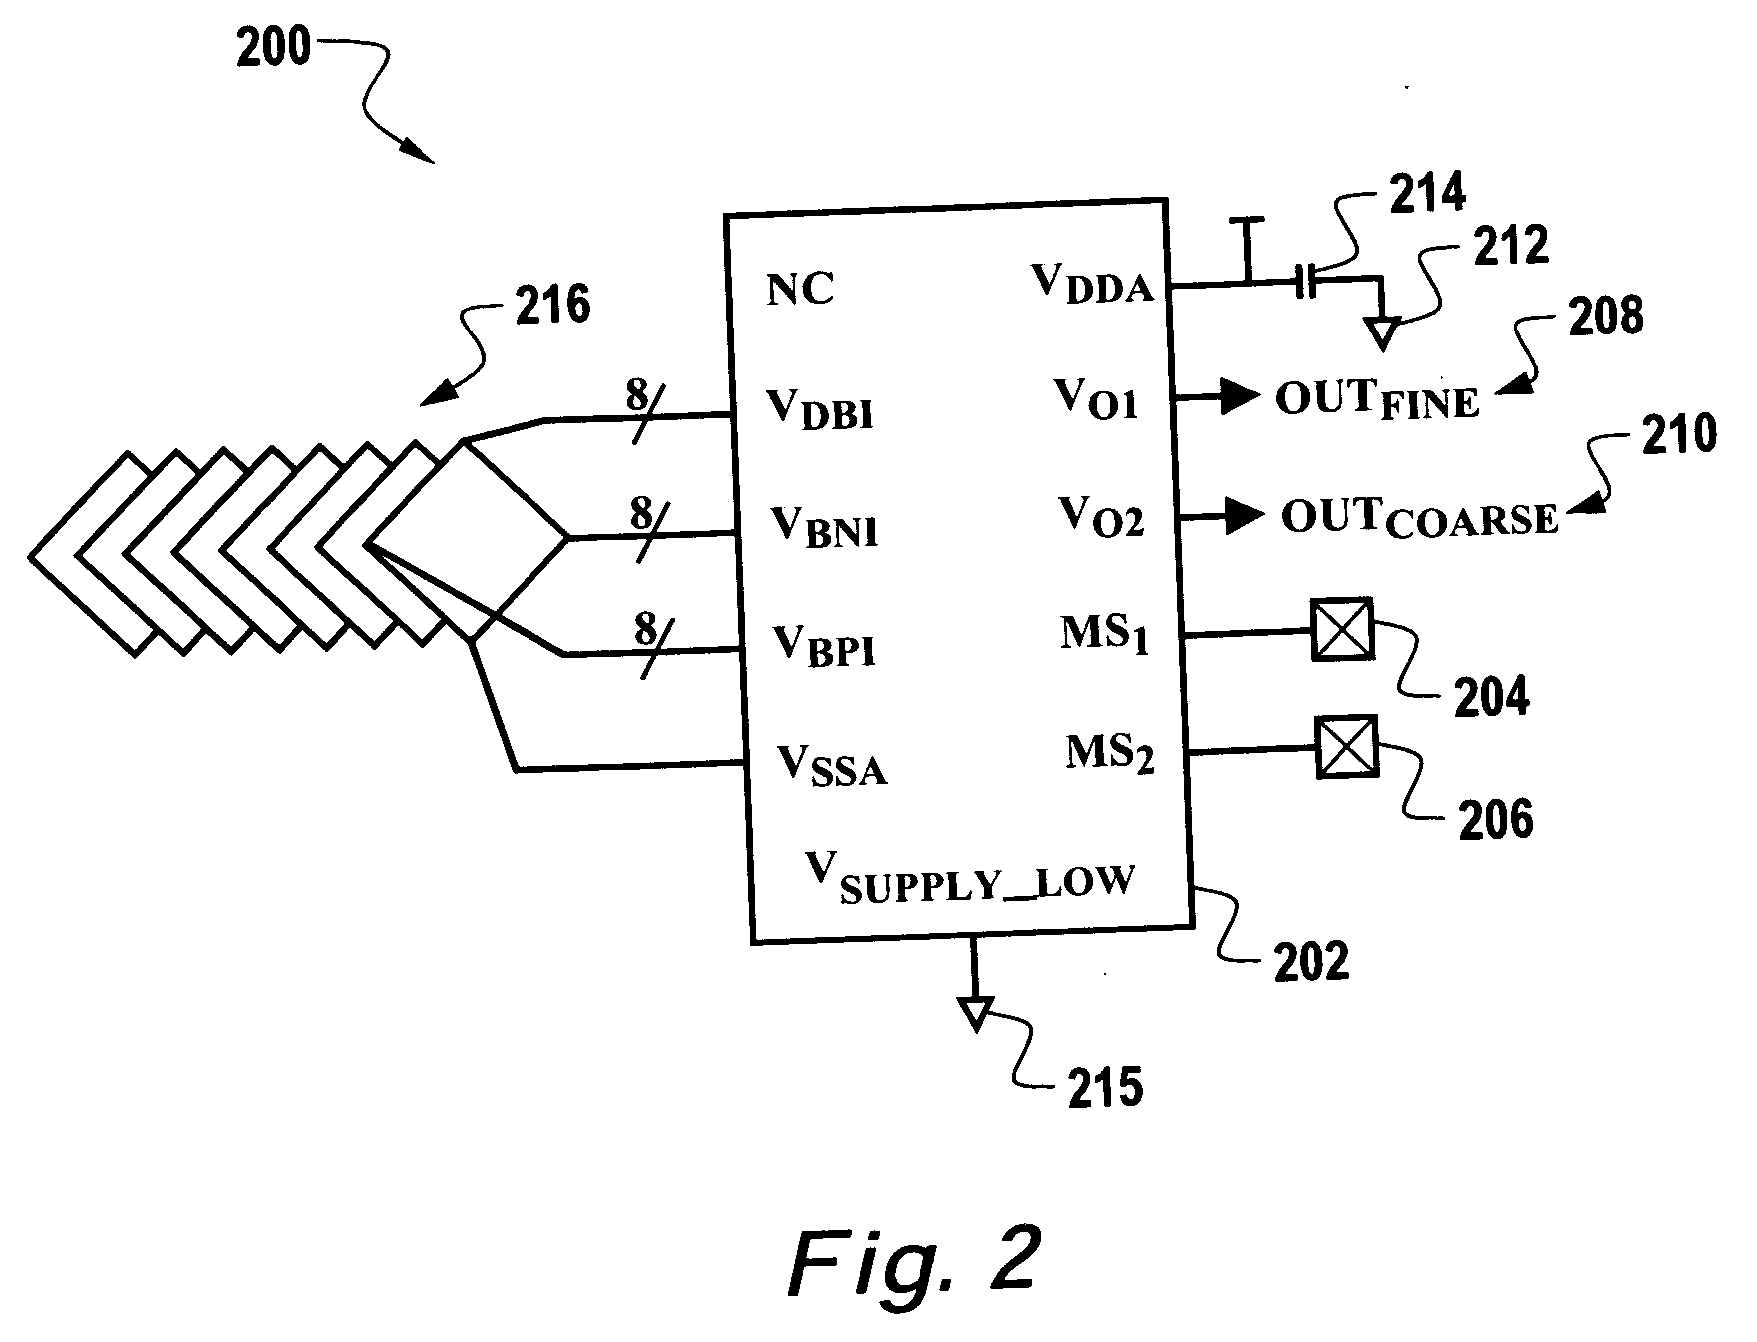 Position detection apparatus and method for linear and rotary sensing applications